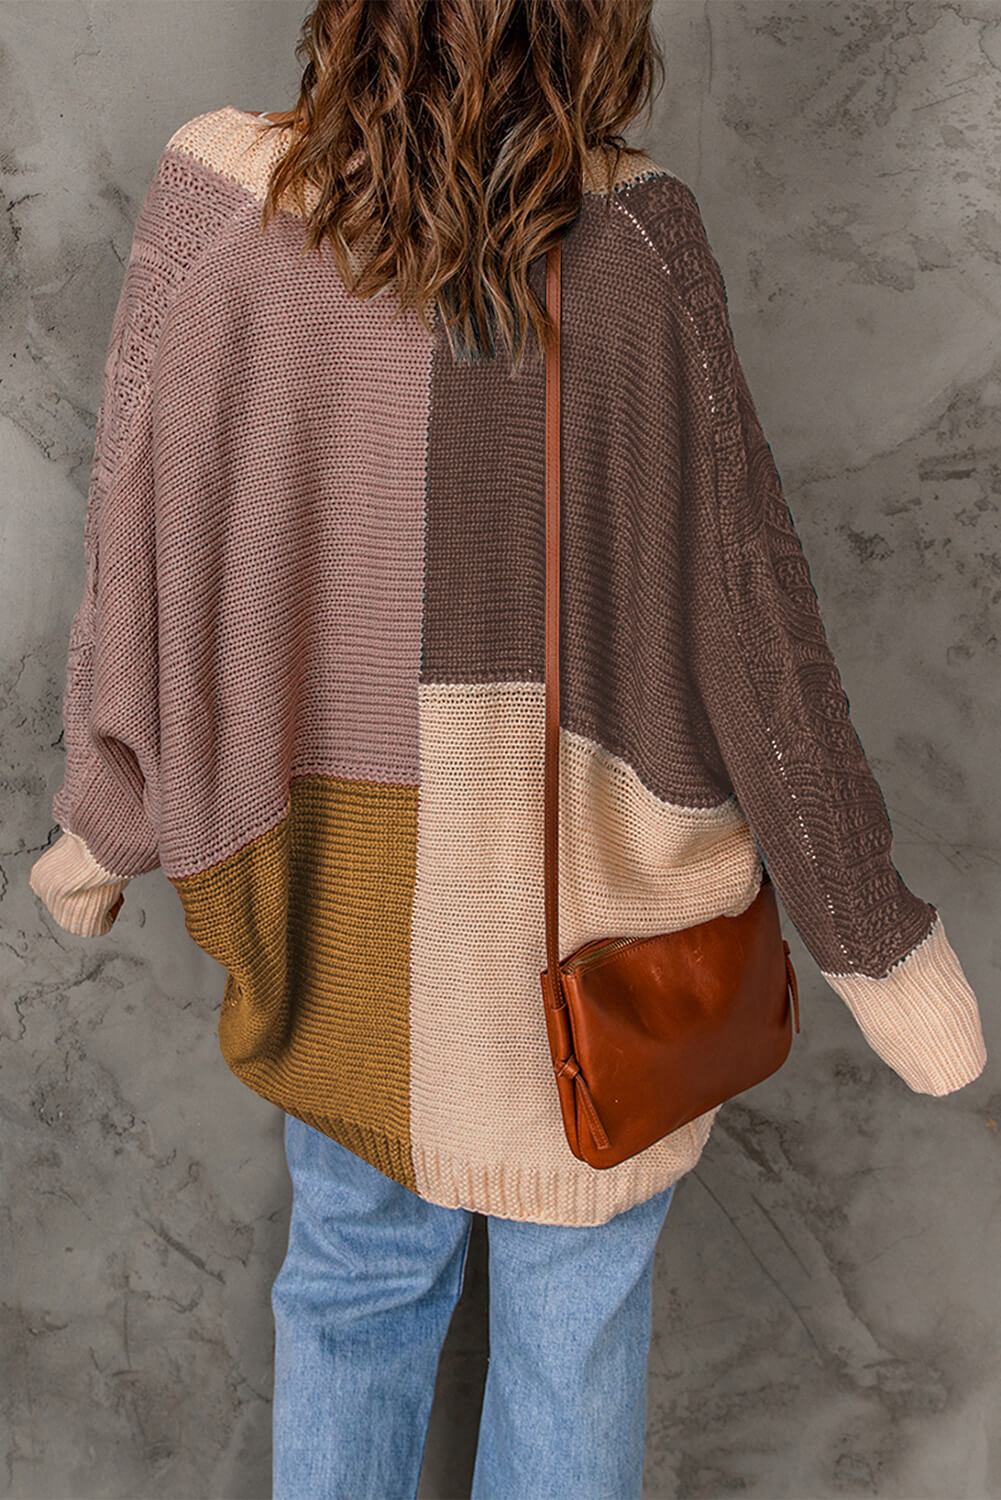 Woven Right Color Block Cable-Knit Batwing Sleeve Cardigan - TiffanyzKlozet